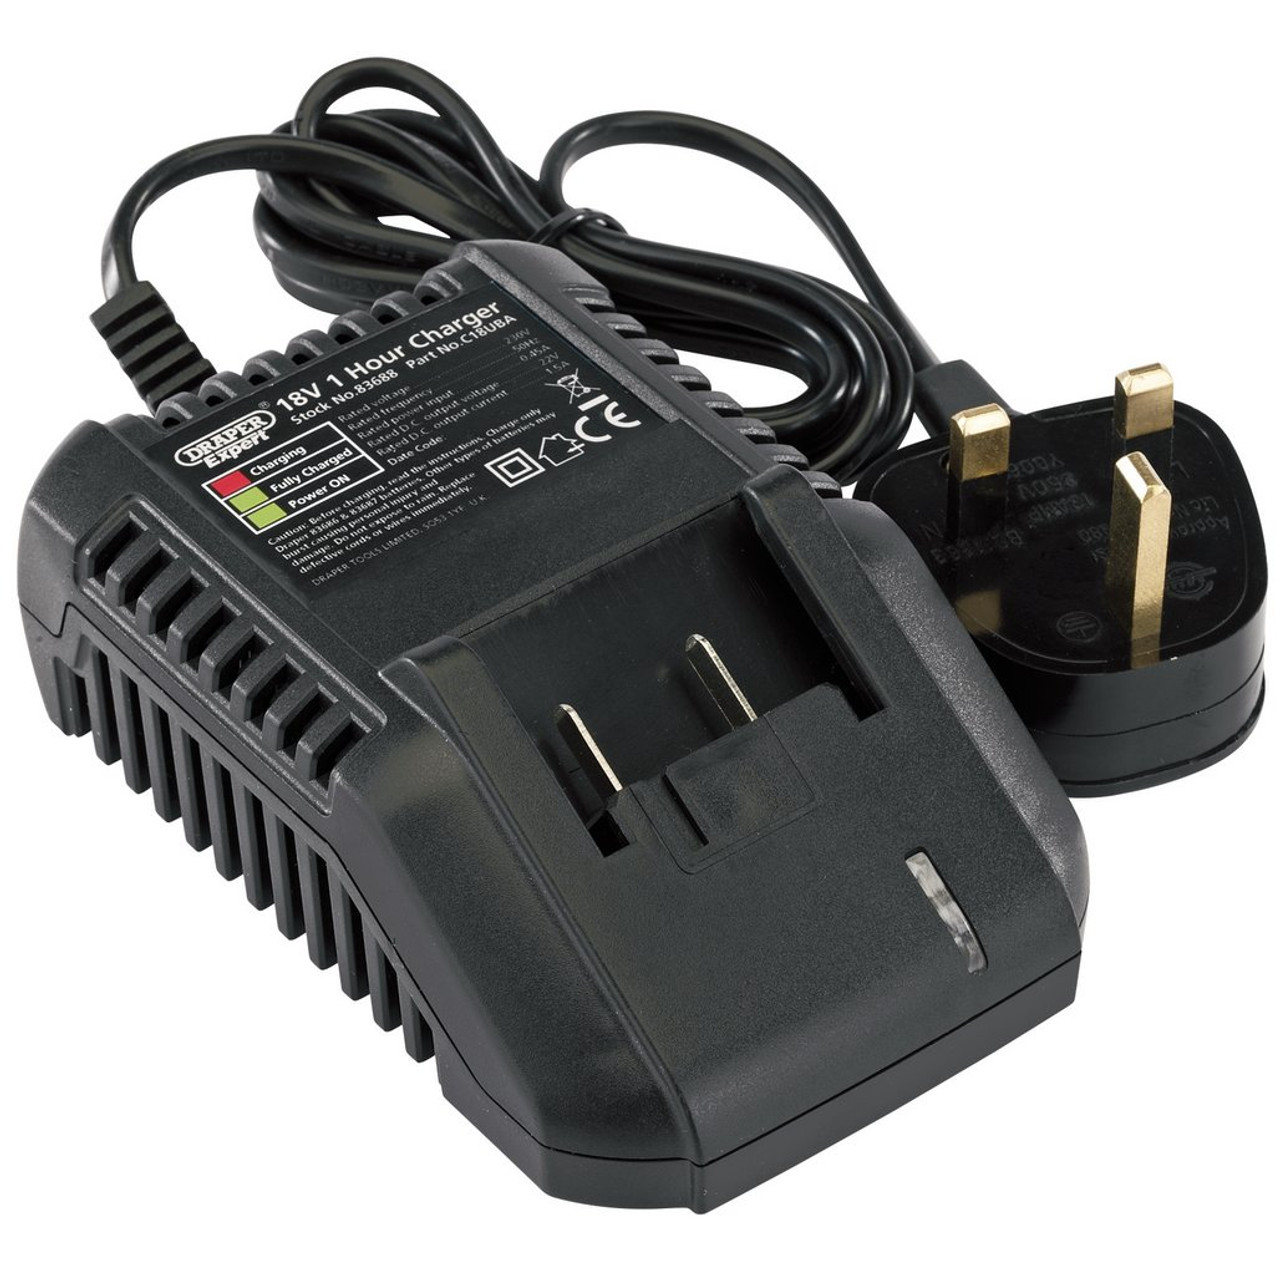 18 Volt Power Tool Batteries & Chargers at